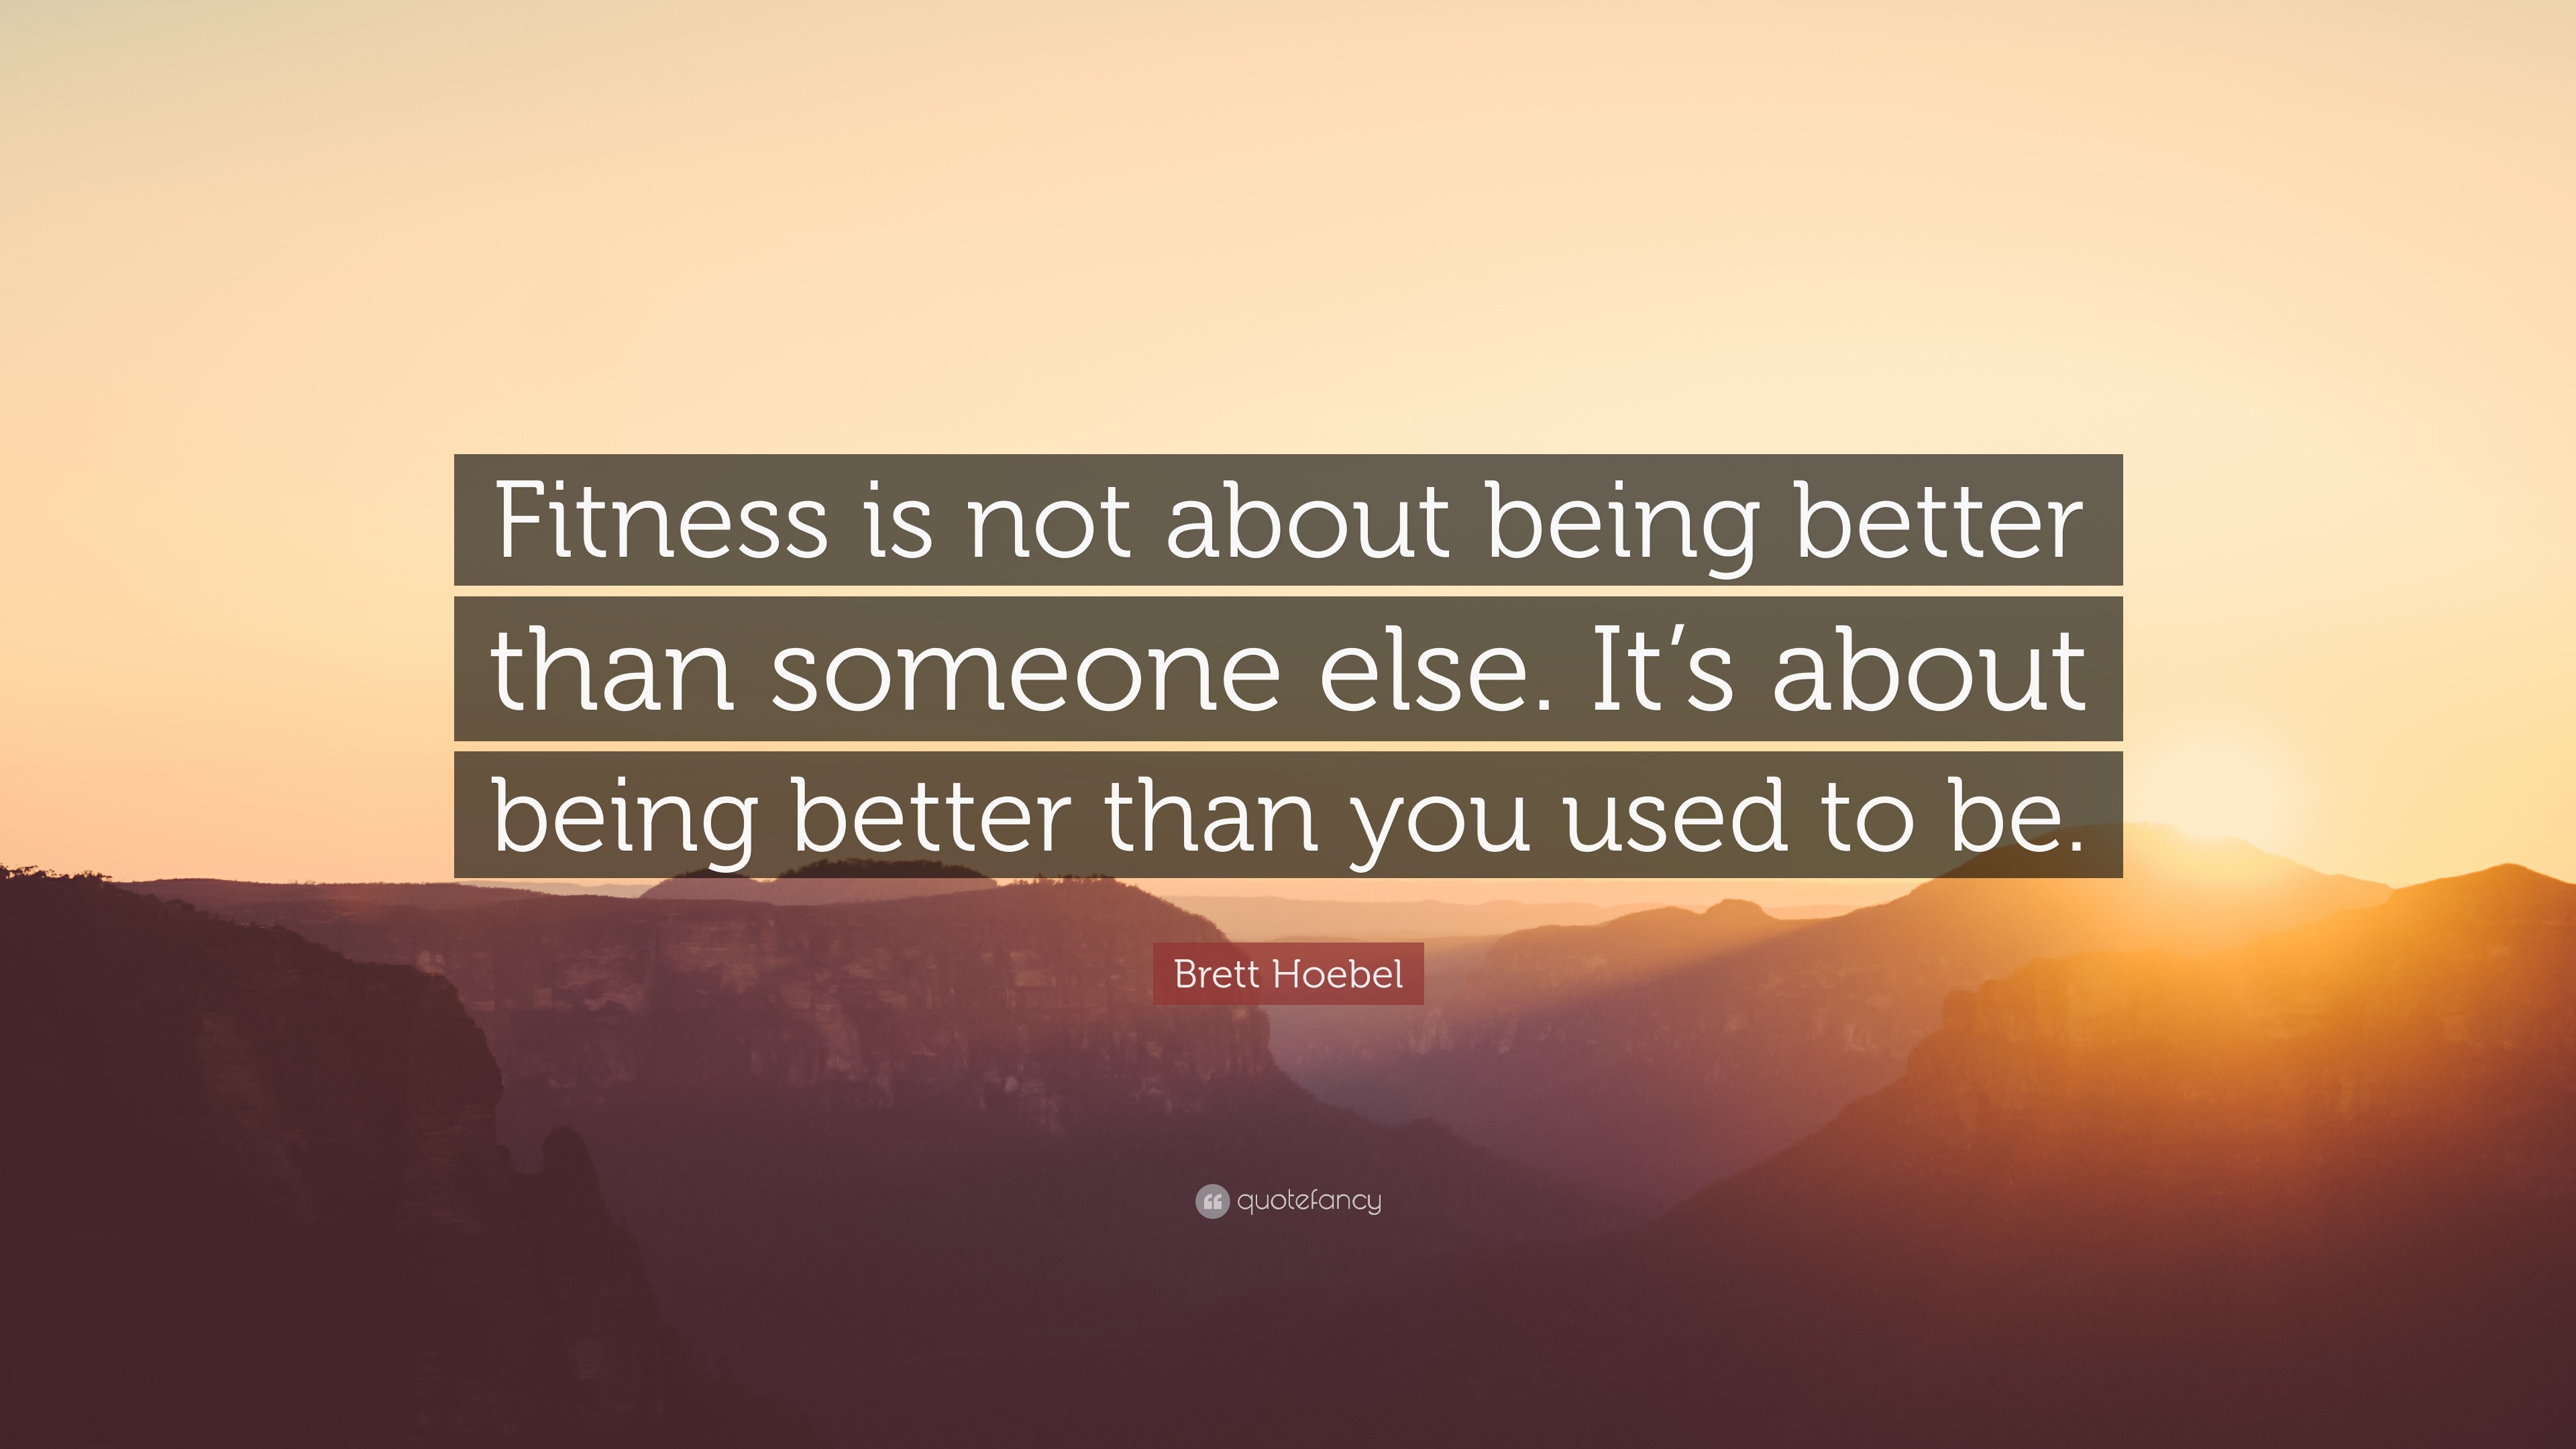 Brett Hoebel Quote: “Fitness is not about being better than someone ...